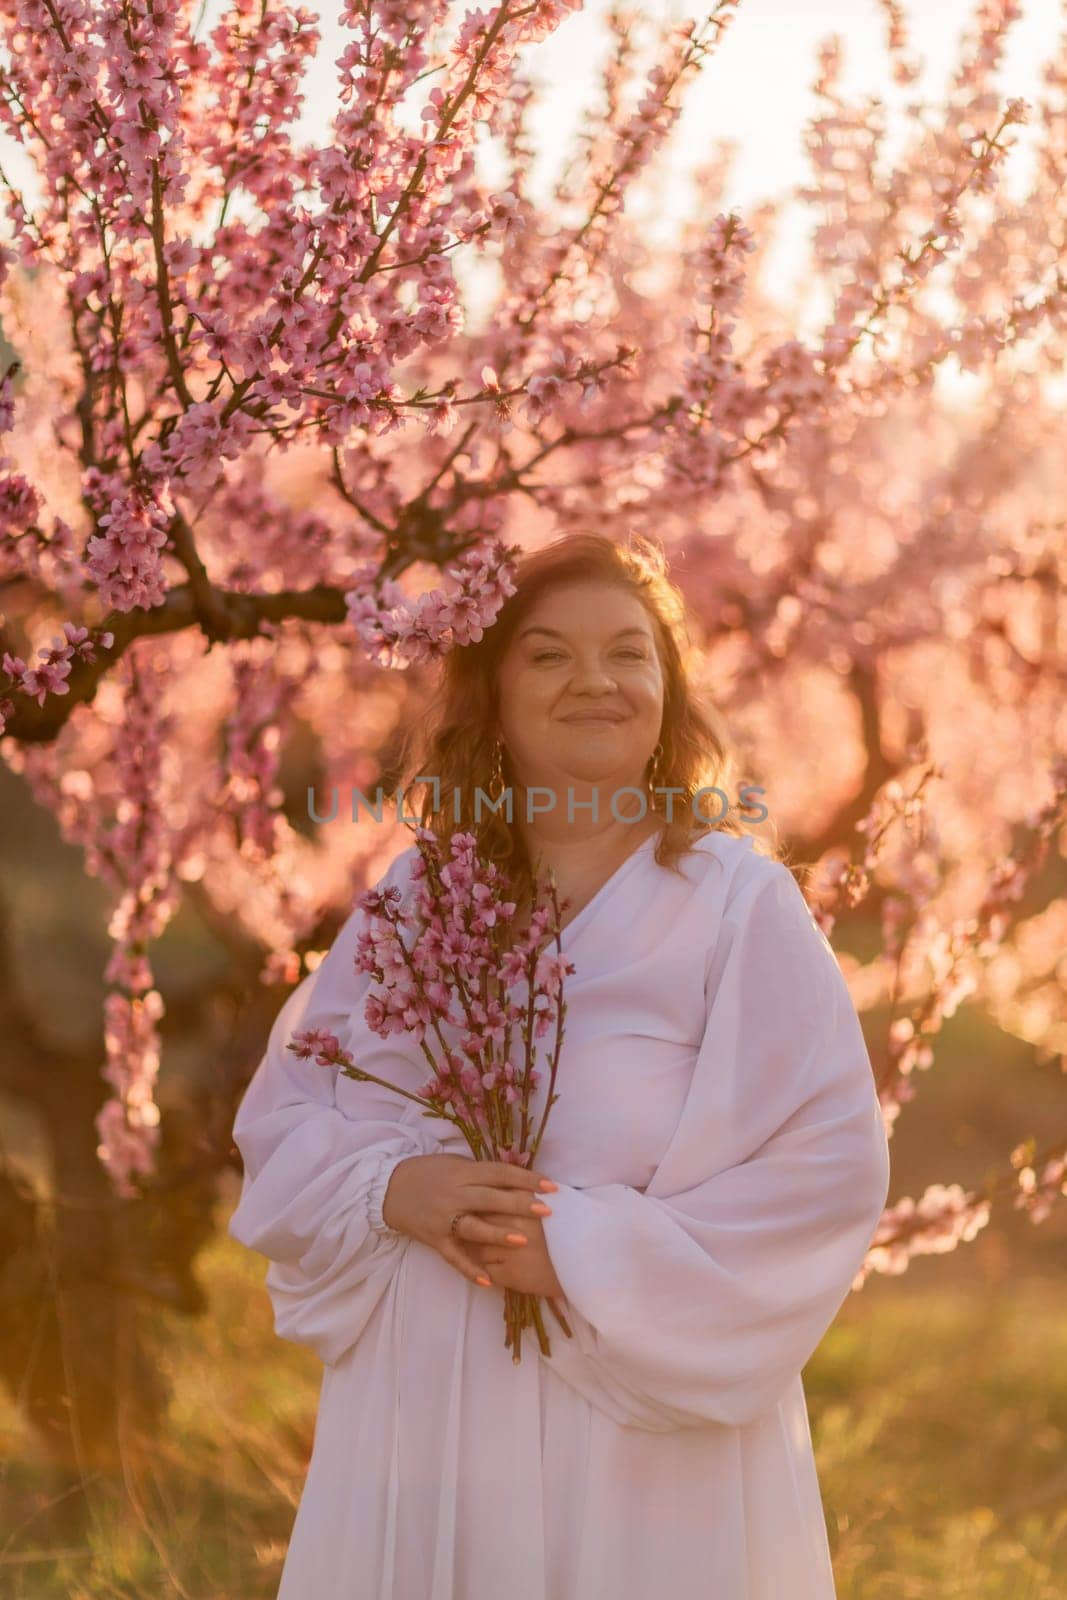 Woman blooming peach orchard. Against the backdrop of a picturesque peach orchard, a woman in a long white dress enjoys a peaceful walk in the park, surrounded by the beauty of nature